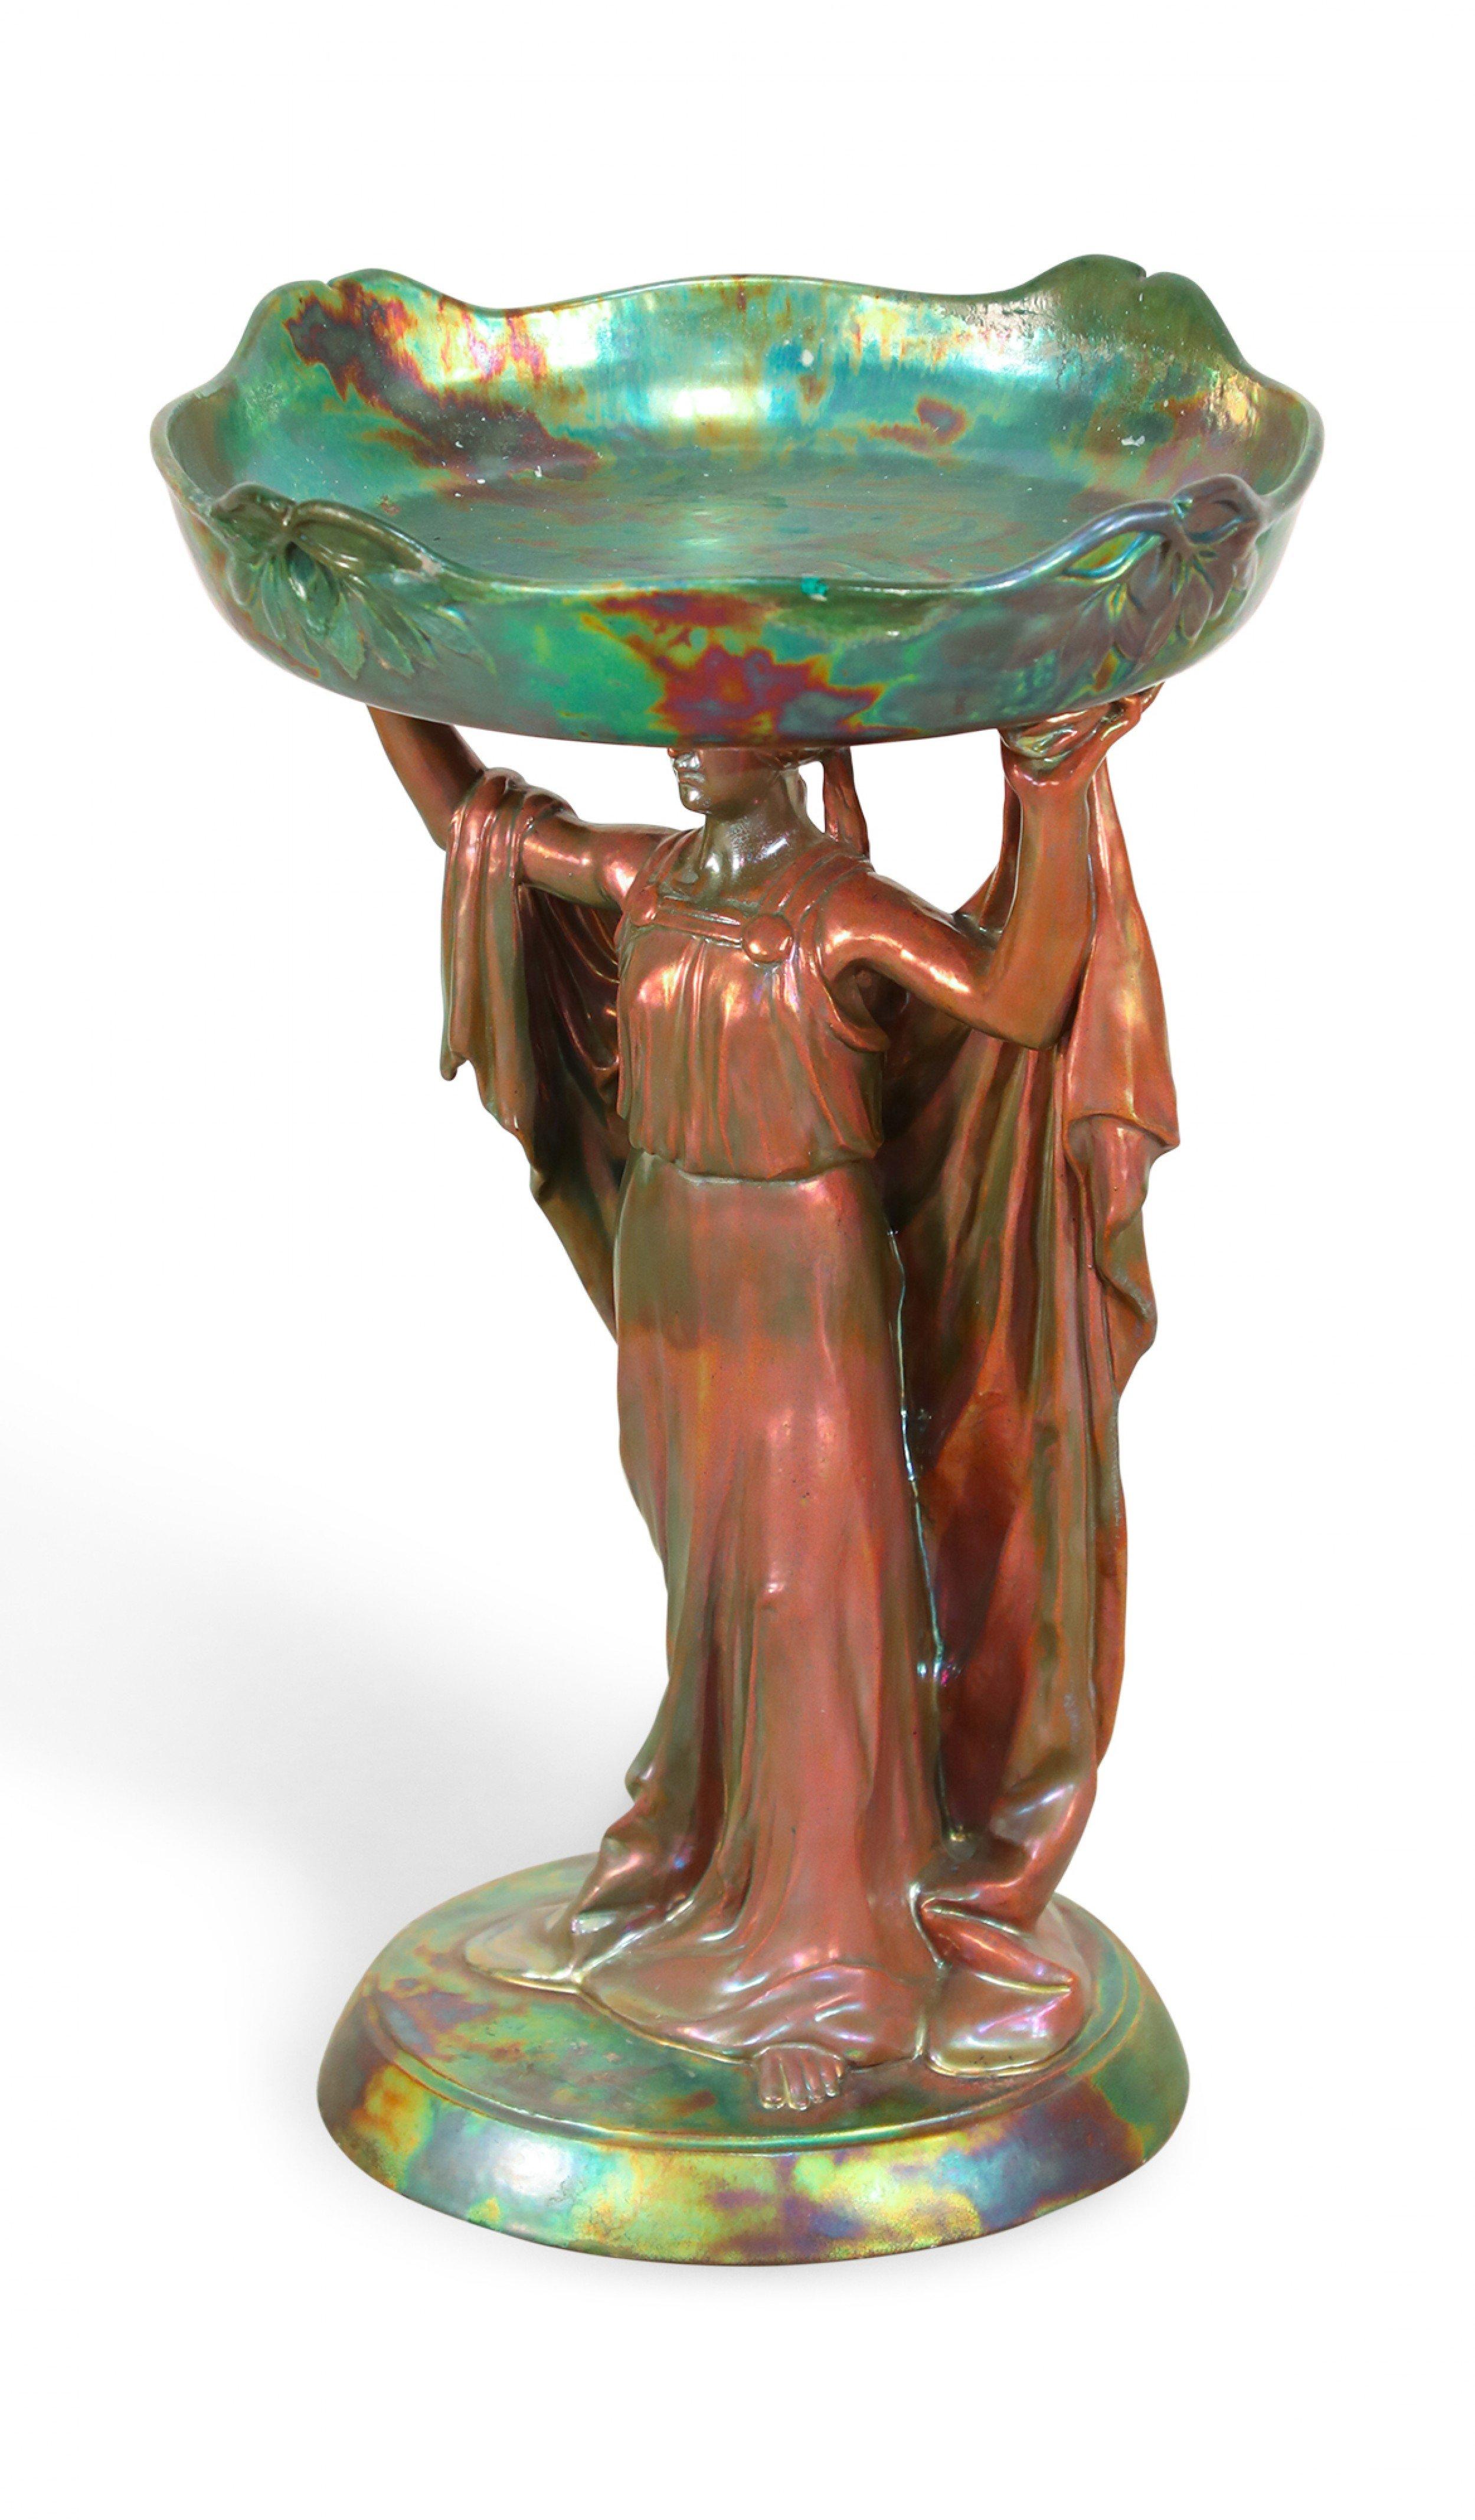 Art Nouveau Zsolnay porcelain green iridescent centerpiece with female figure holding round tray above head.
       